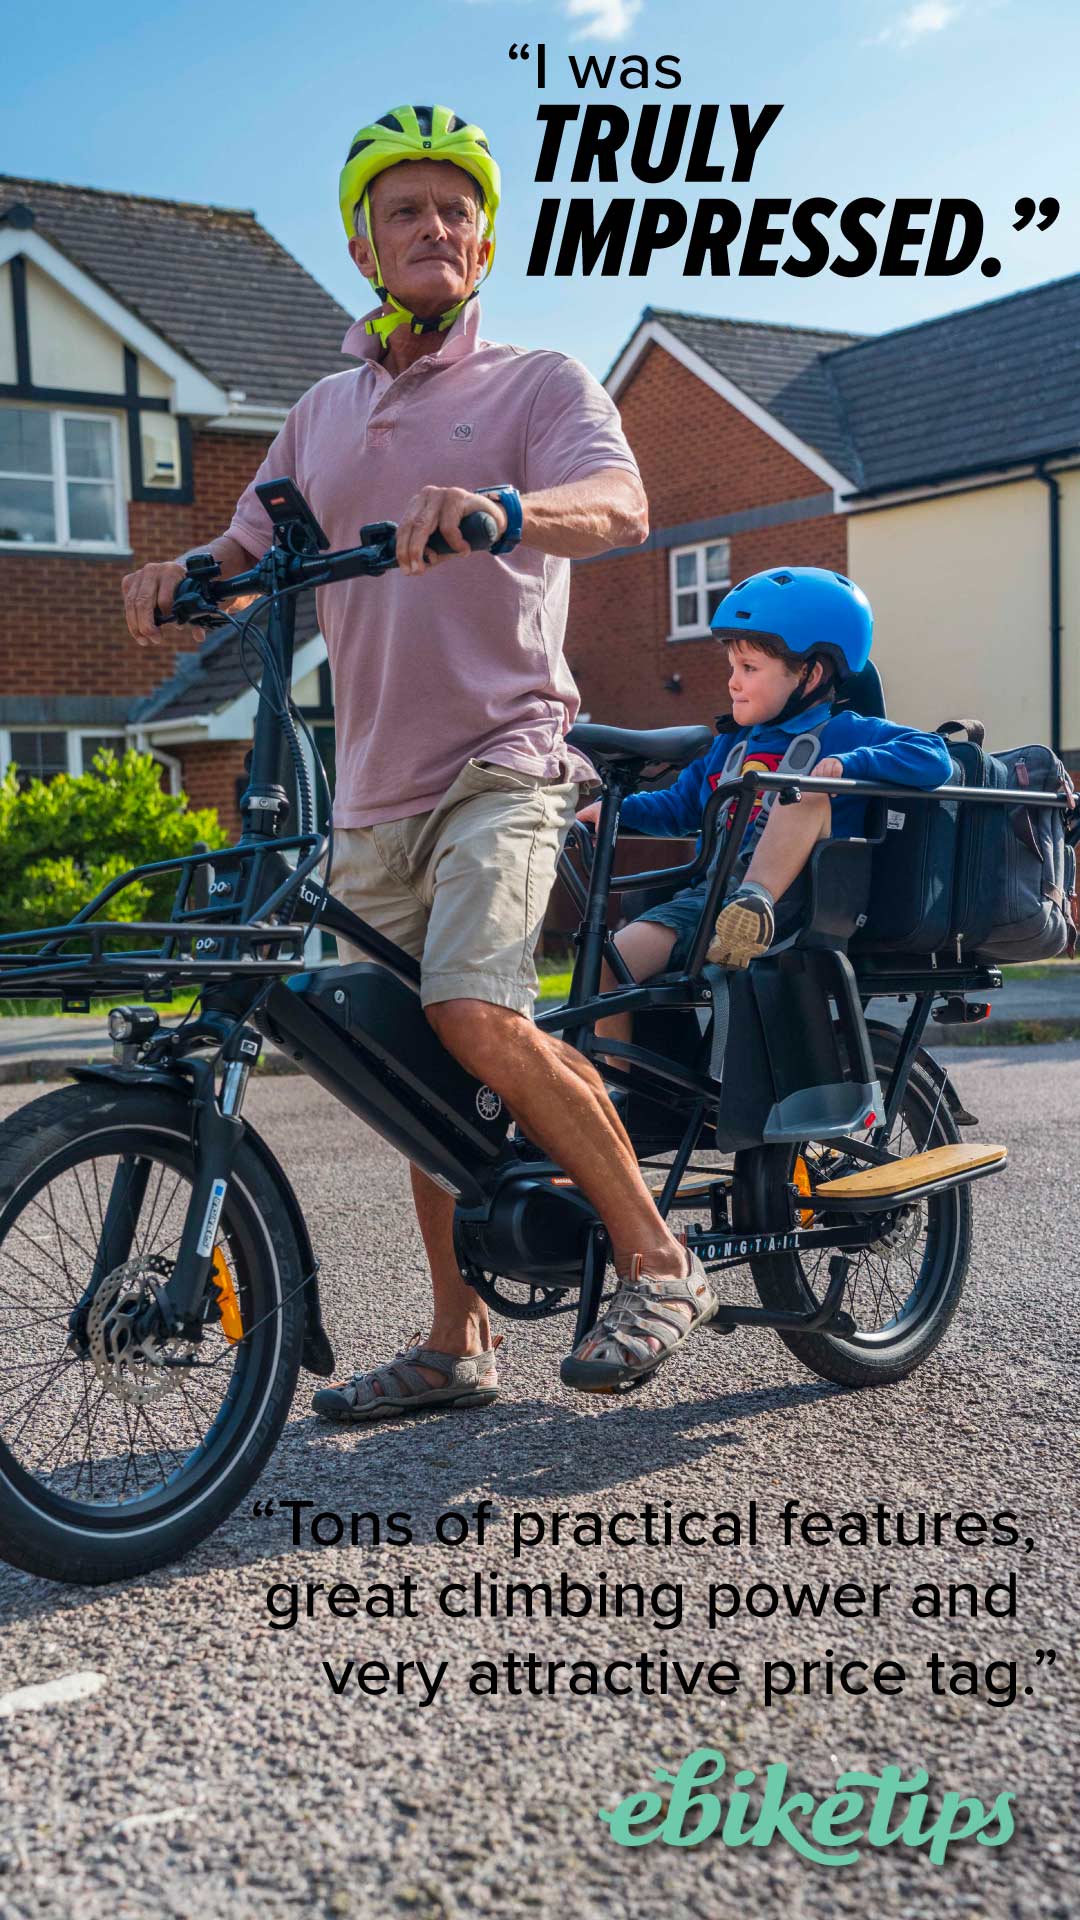 "I was truly impressed. Tons of practical features, great climbing power and a very attractive price tag". Ebiketips review of the estarli eCargo.